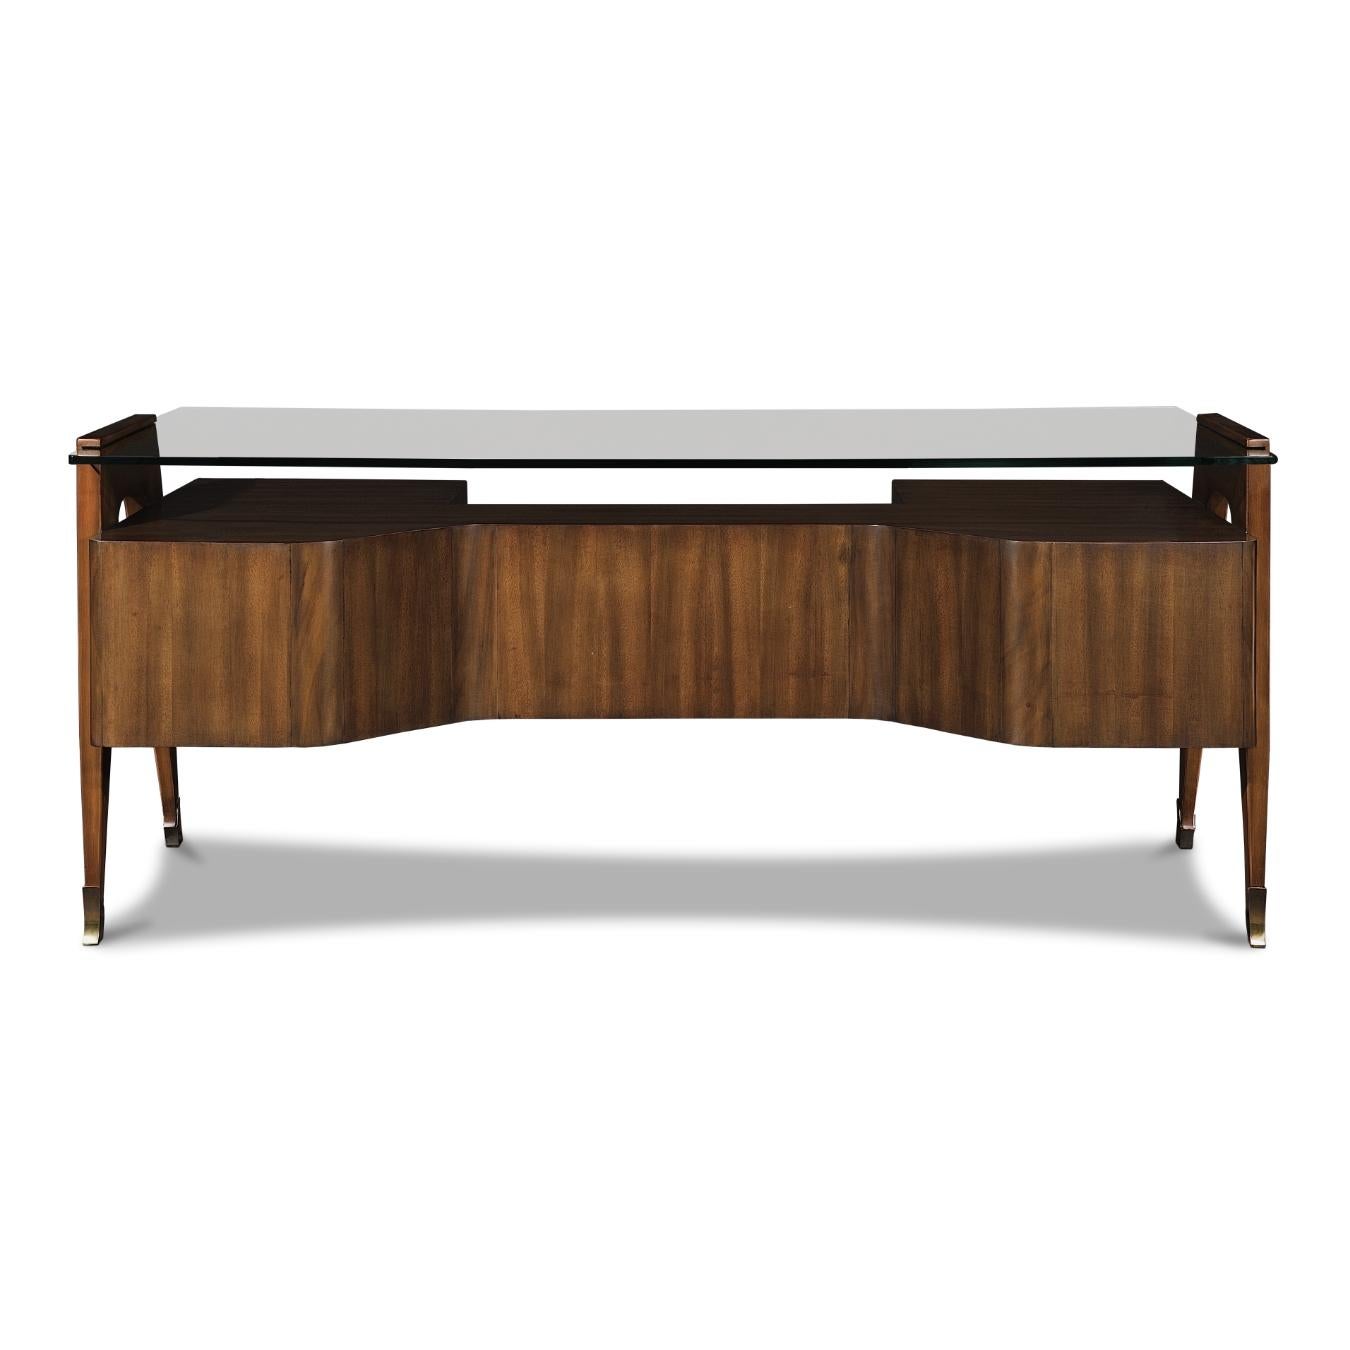 This desk was inspired by the Mid-Century Modern style. It is made from Koa wood and has four drawers with wooden handles. Adorned with brass detailing and a floating clear tabletop under which you can exhibit books or other decorative items. The